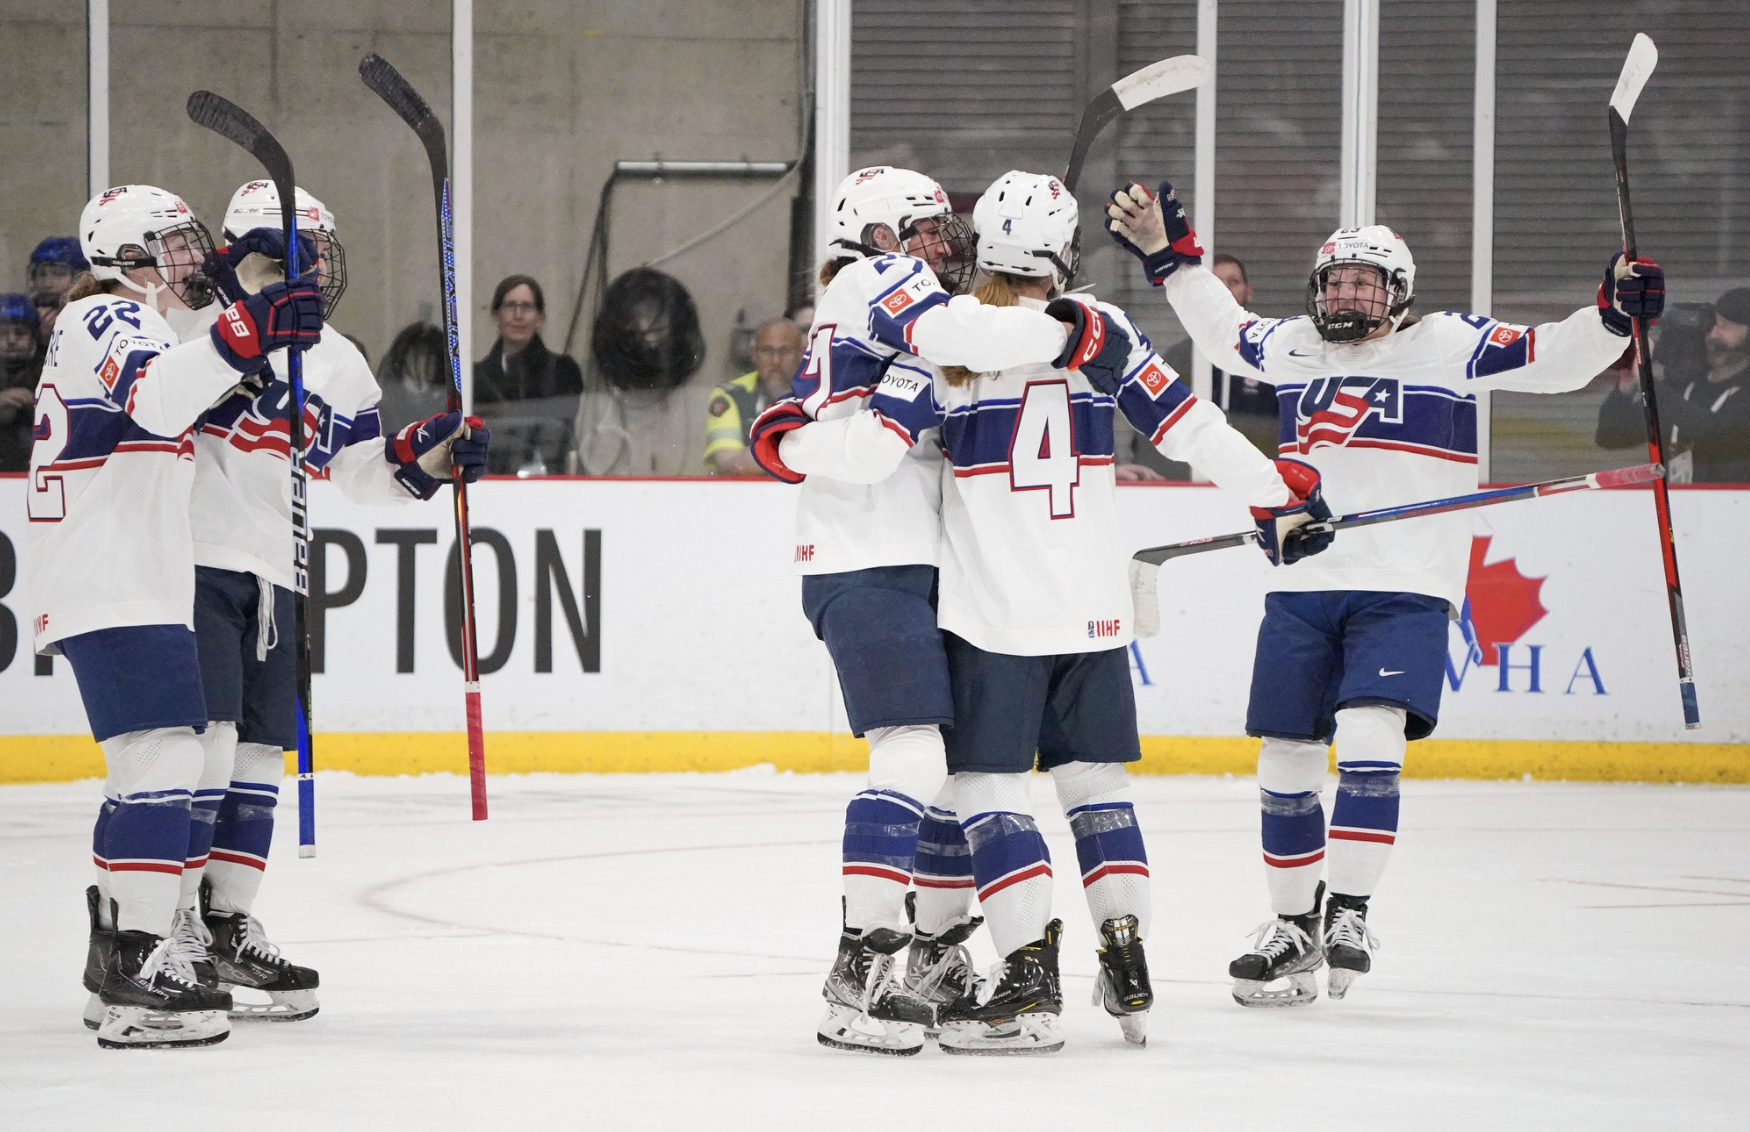 Team USA players celebrate a goal against Switzerland with a group hug. Two are already in the hug, while two others skate from the left to join and one from the right. They're all wearing white USA uniforms.